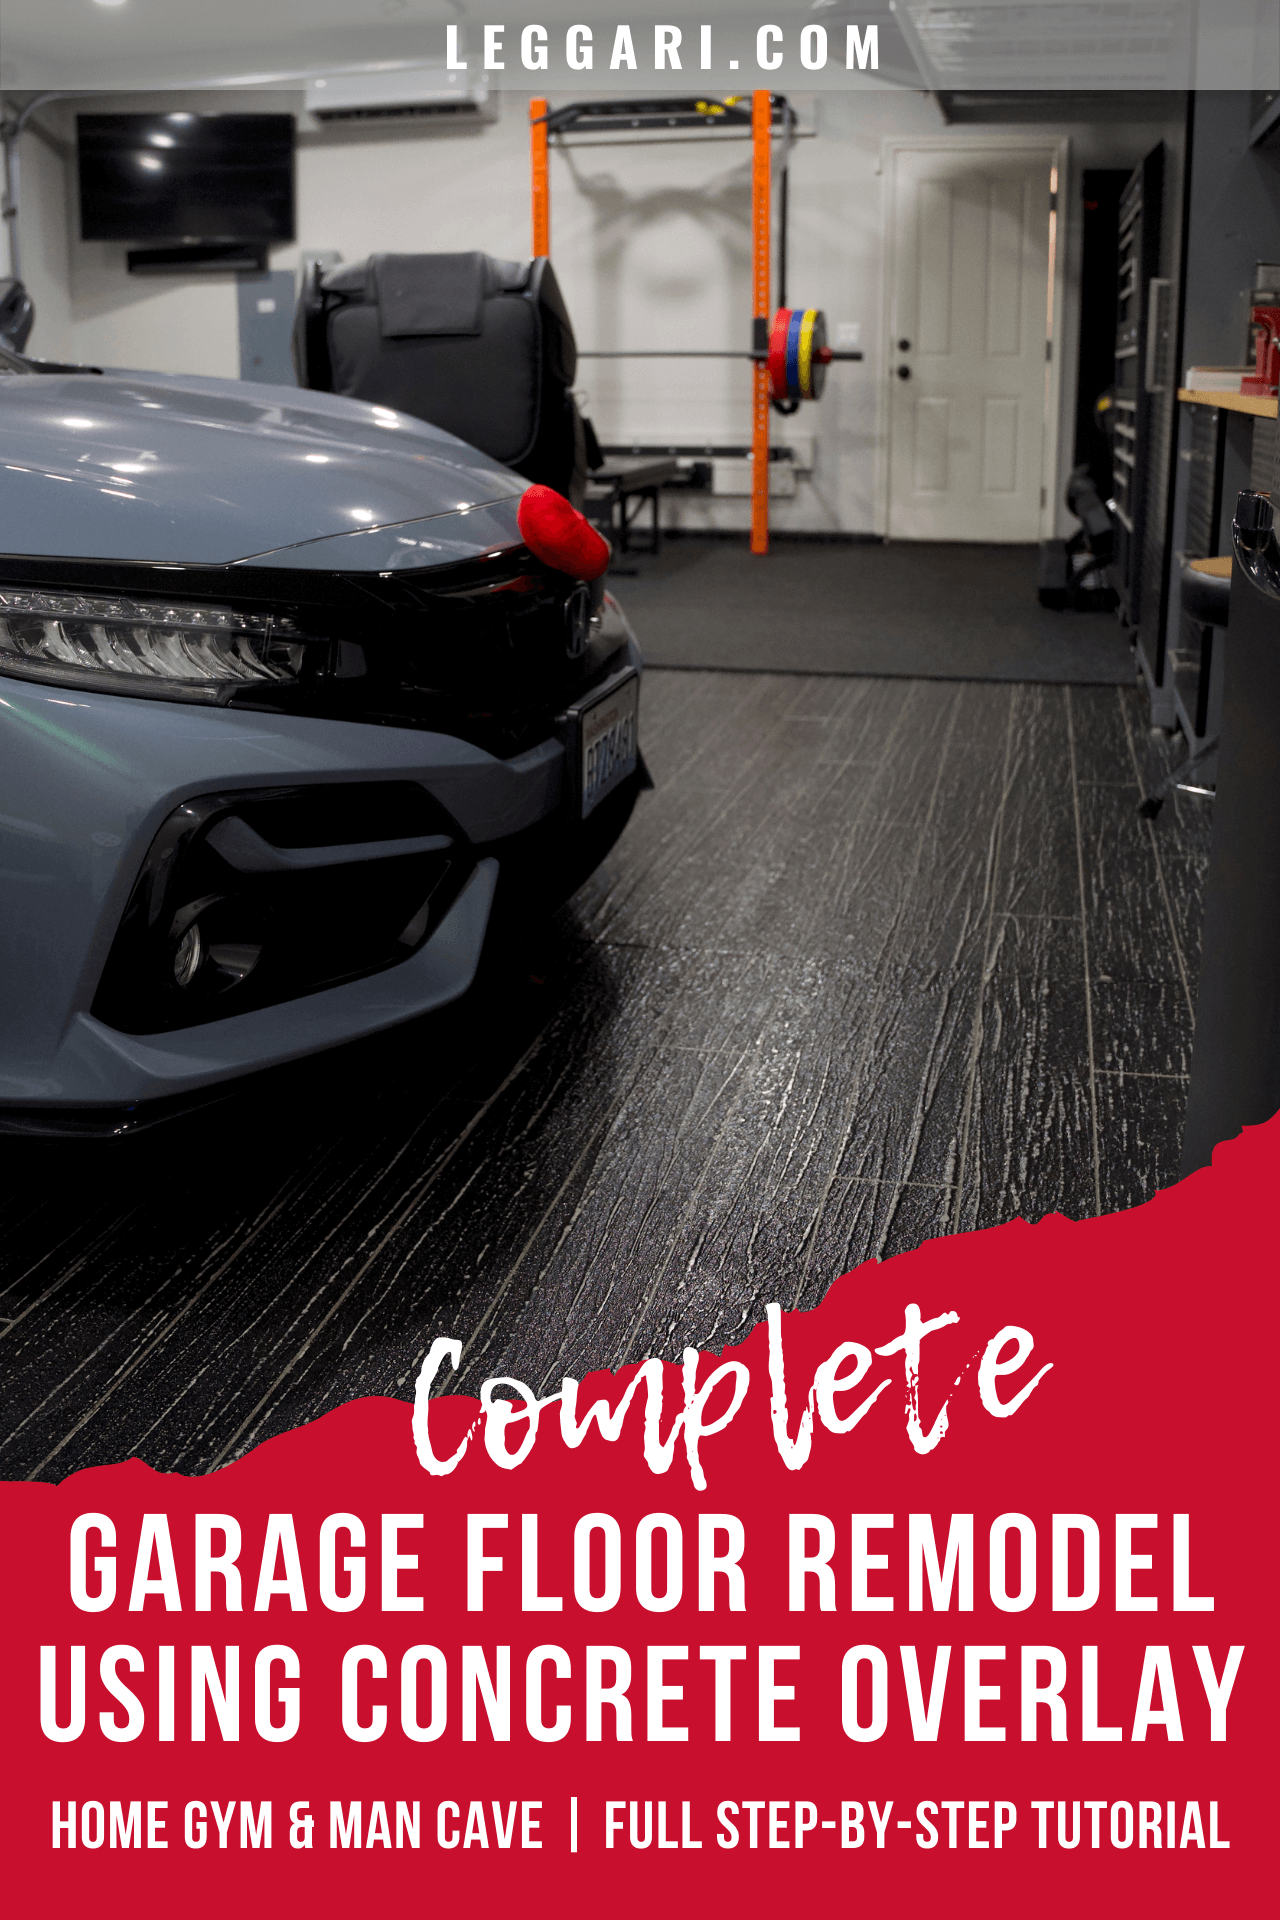 Garage floor remodel using concrete overlay - Home gym and man cave